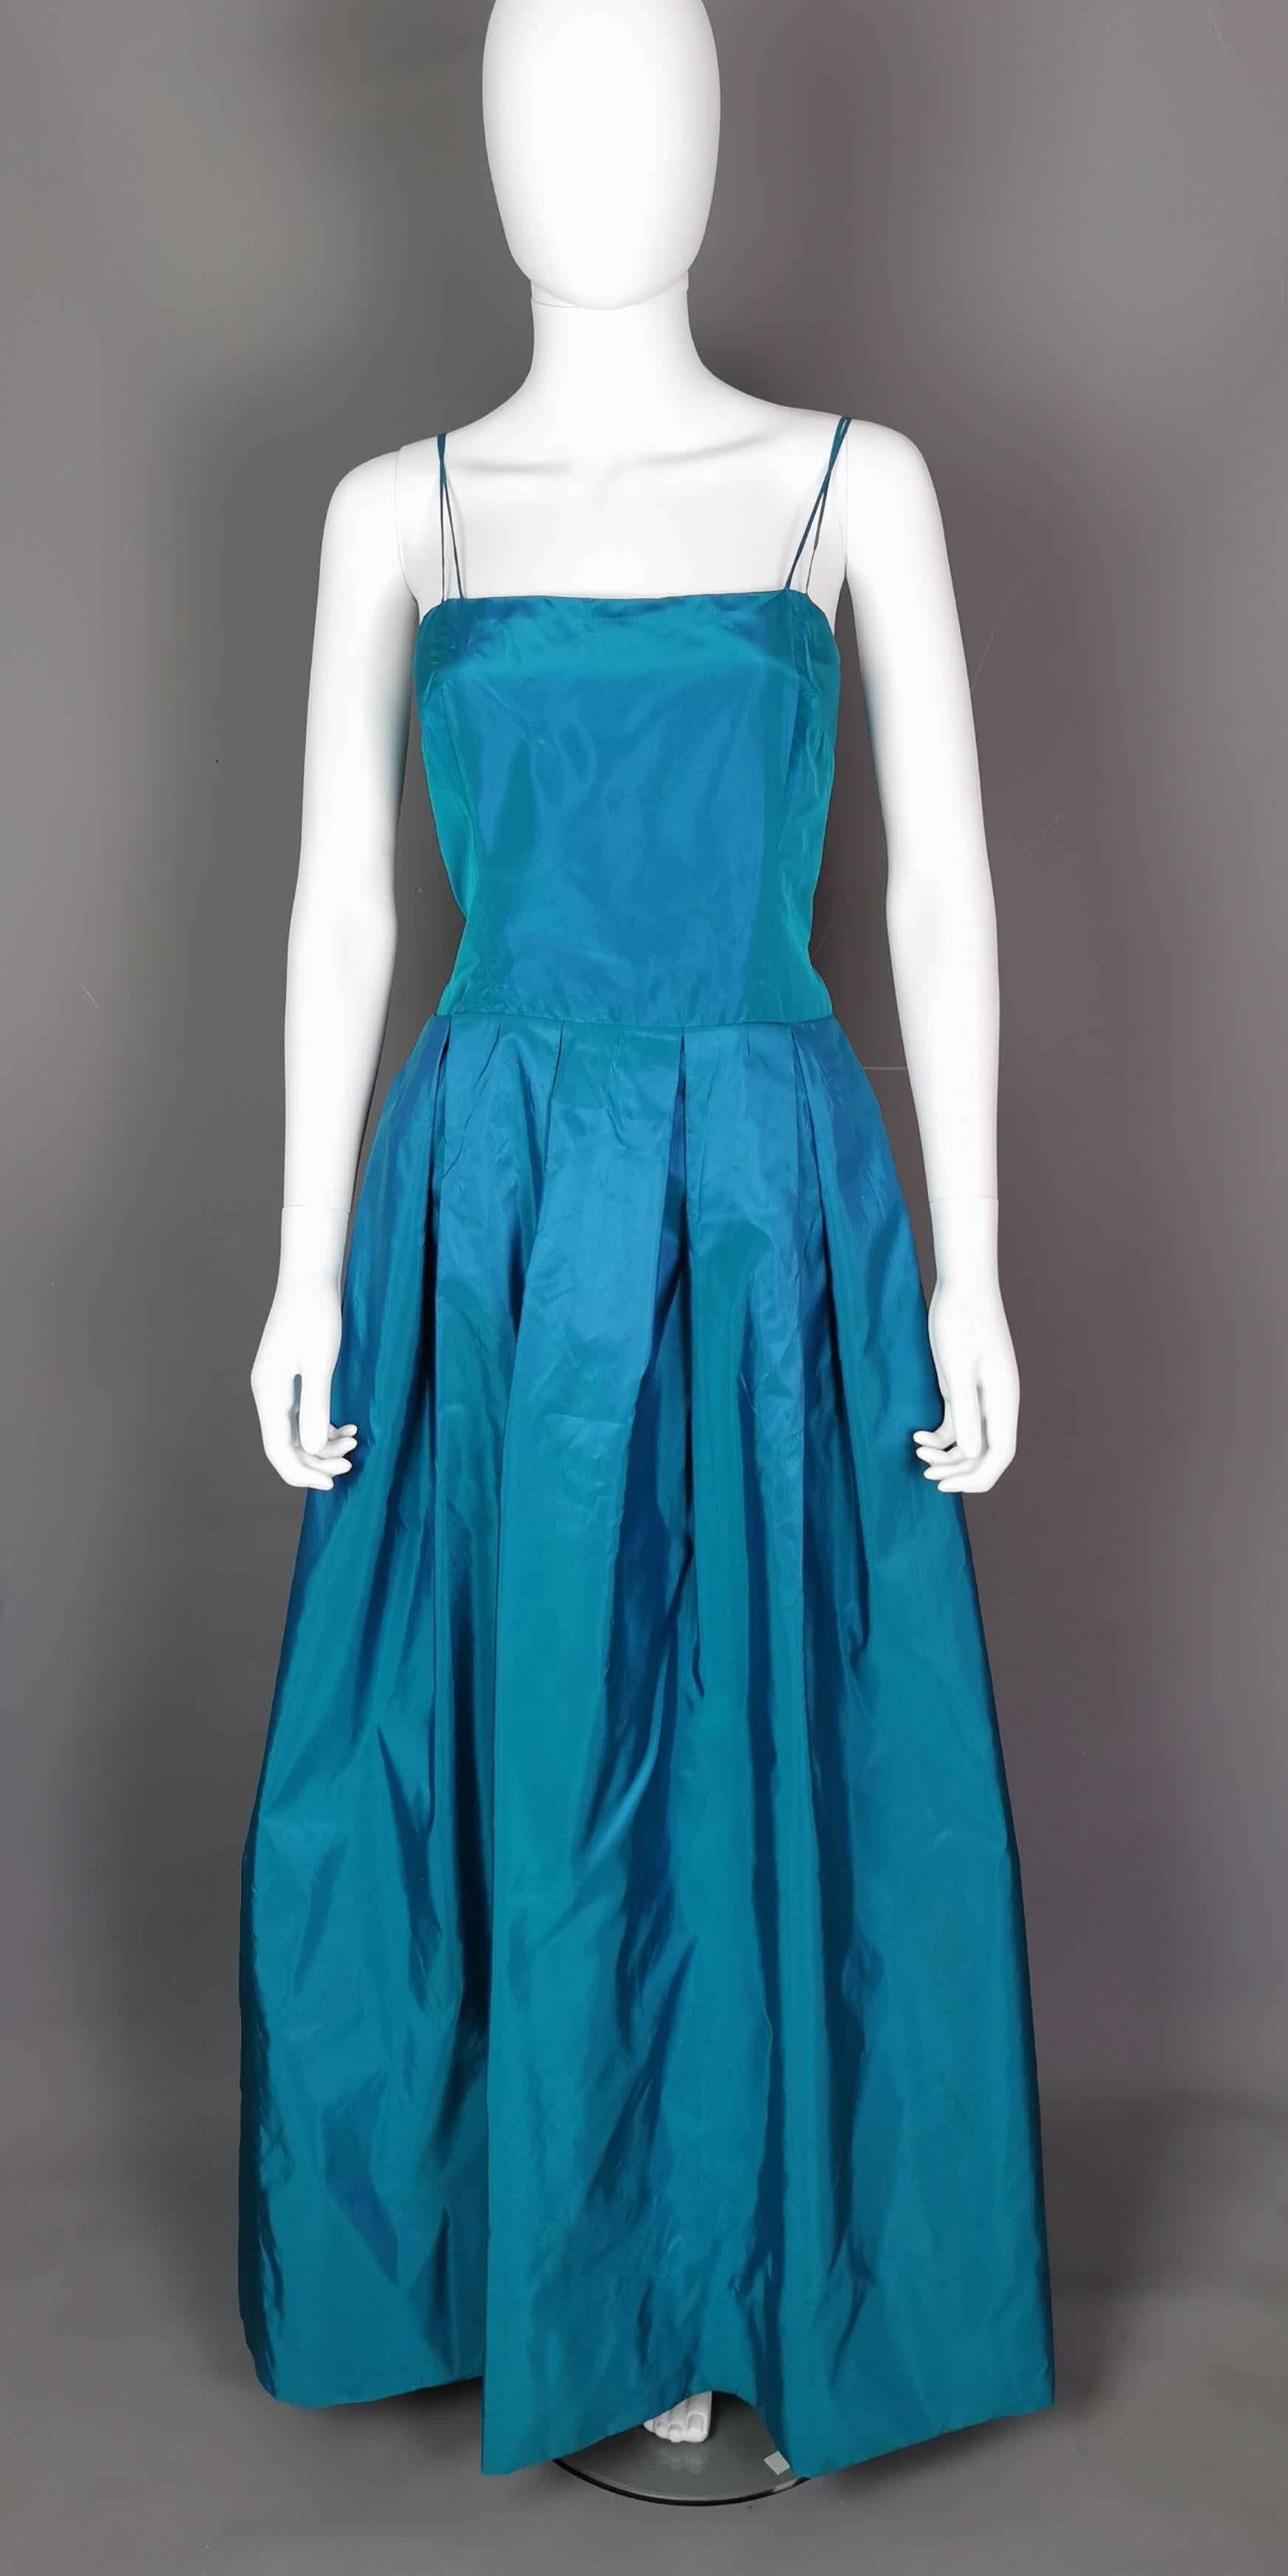 An incredible vintage two piece dress by Hardy Amies.

Made in a vibrant slightly two tone blue / green shot silk taffeta the set comprises of a long length evening gown and a matching bolero type jacket.

It is a teal blue with a metallic green